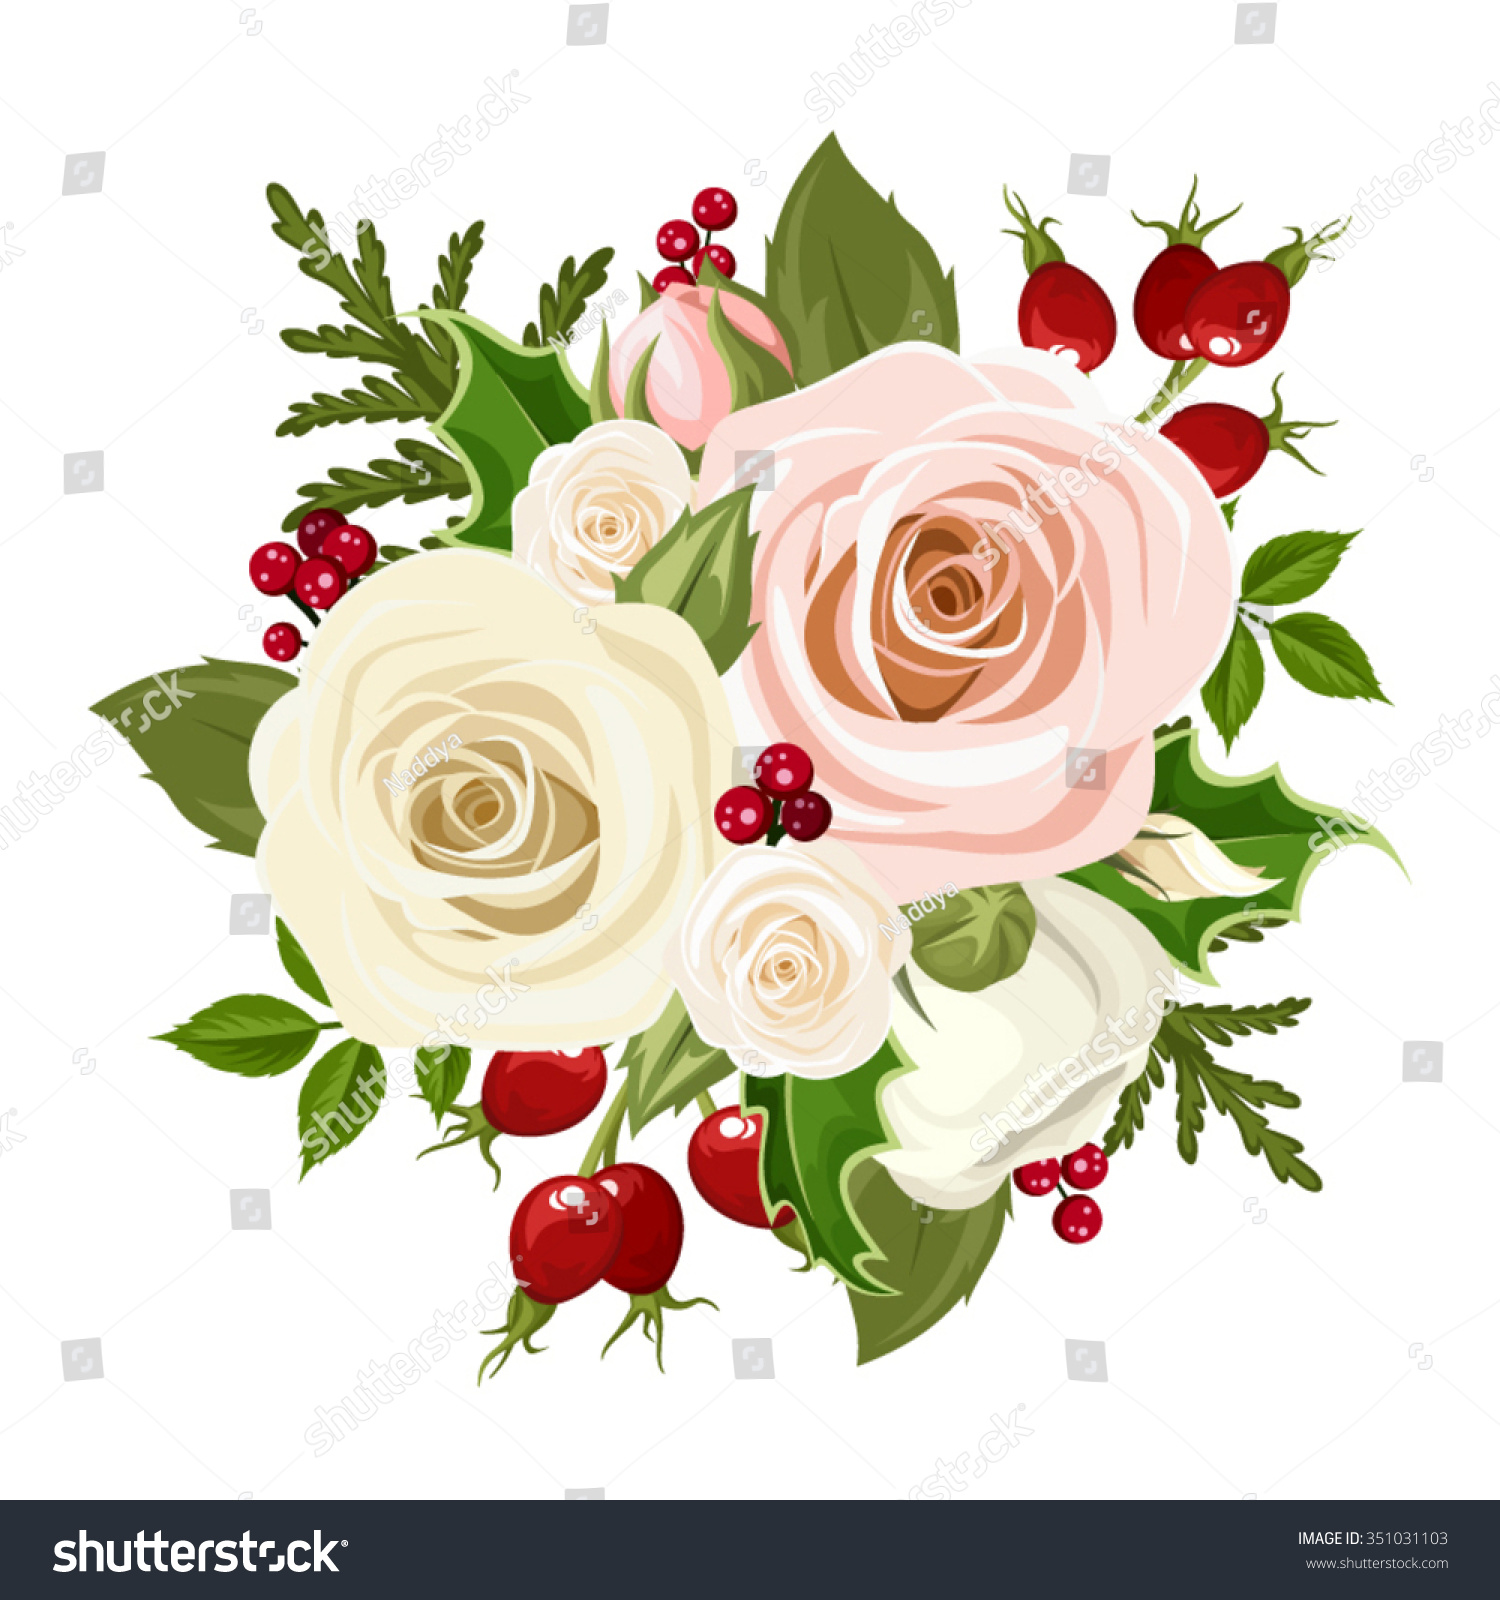 christmas rose clipart - photo #30